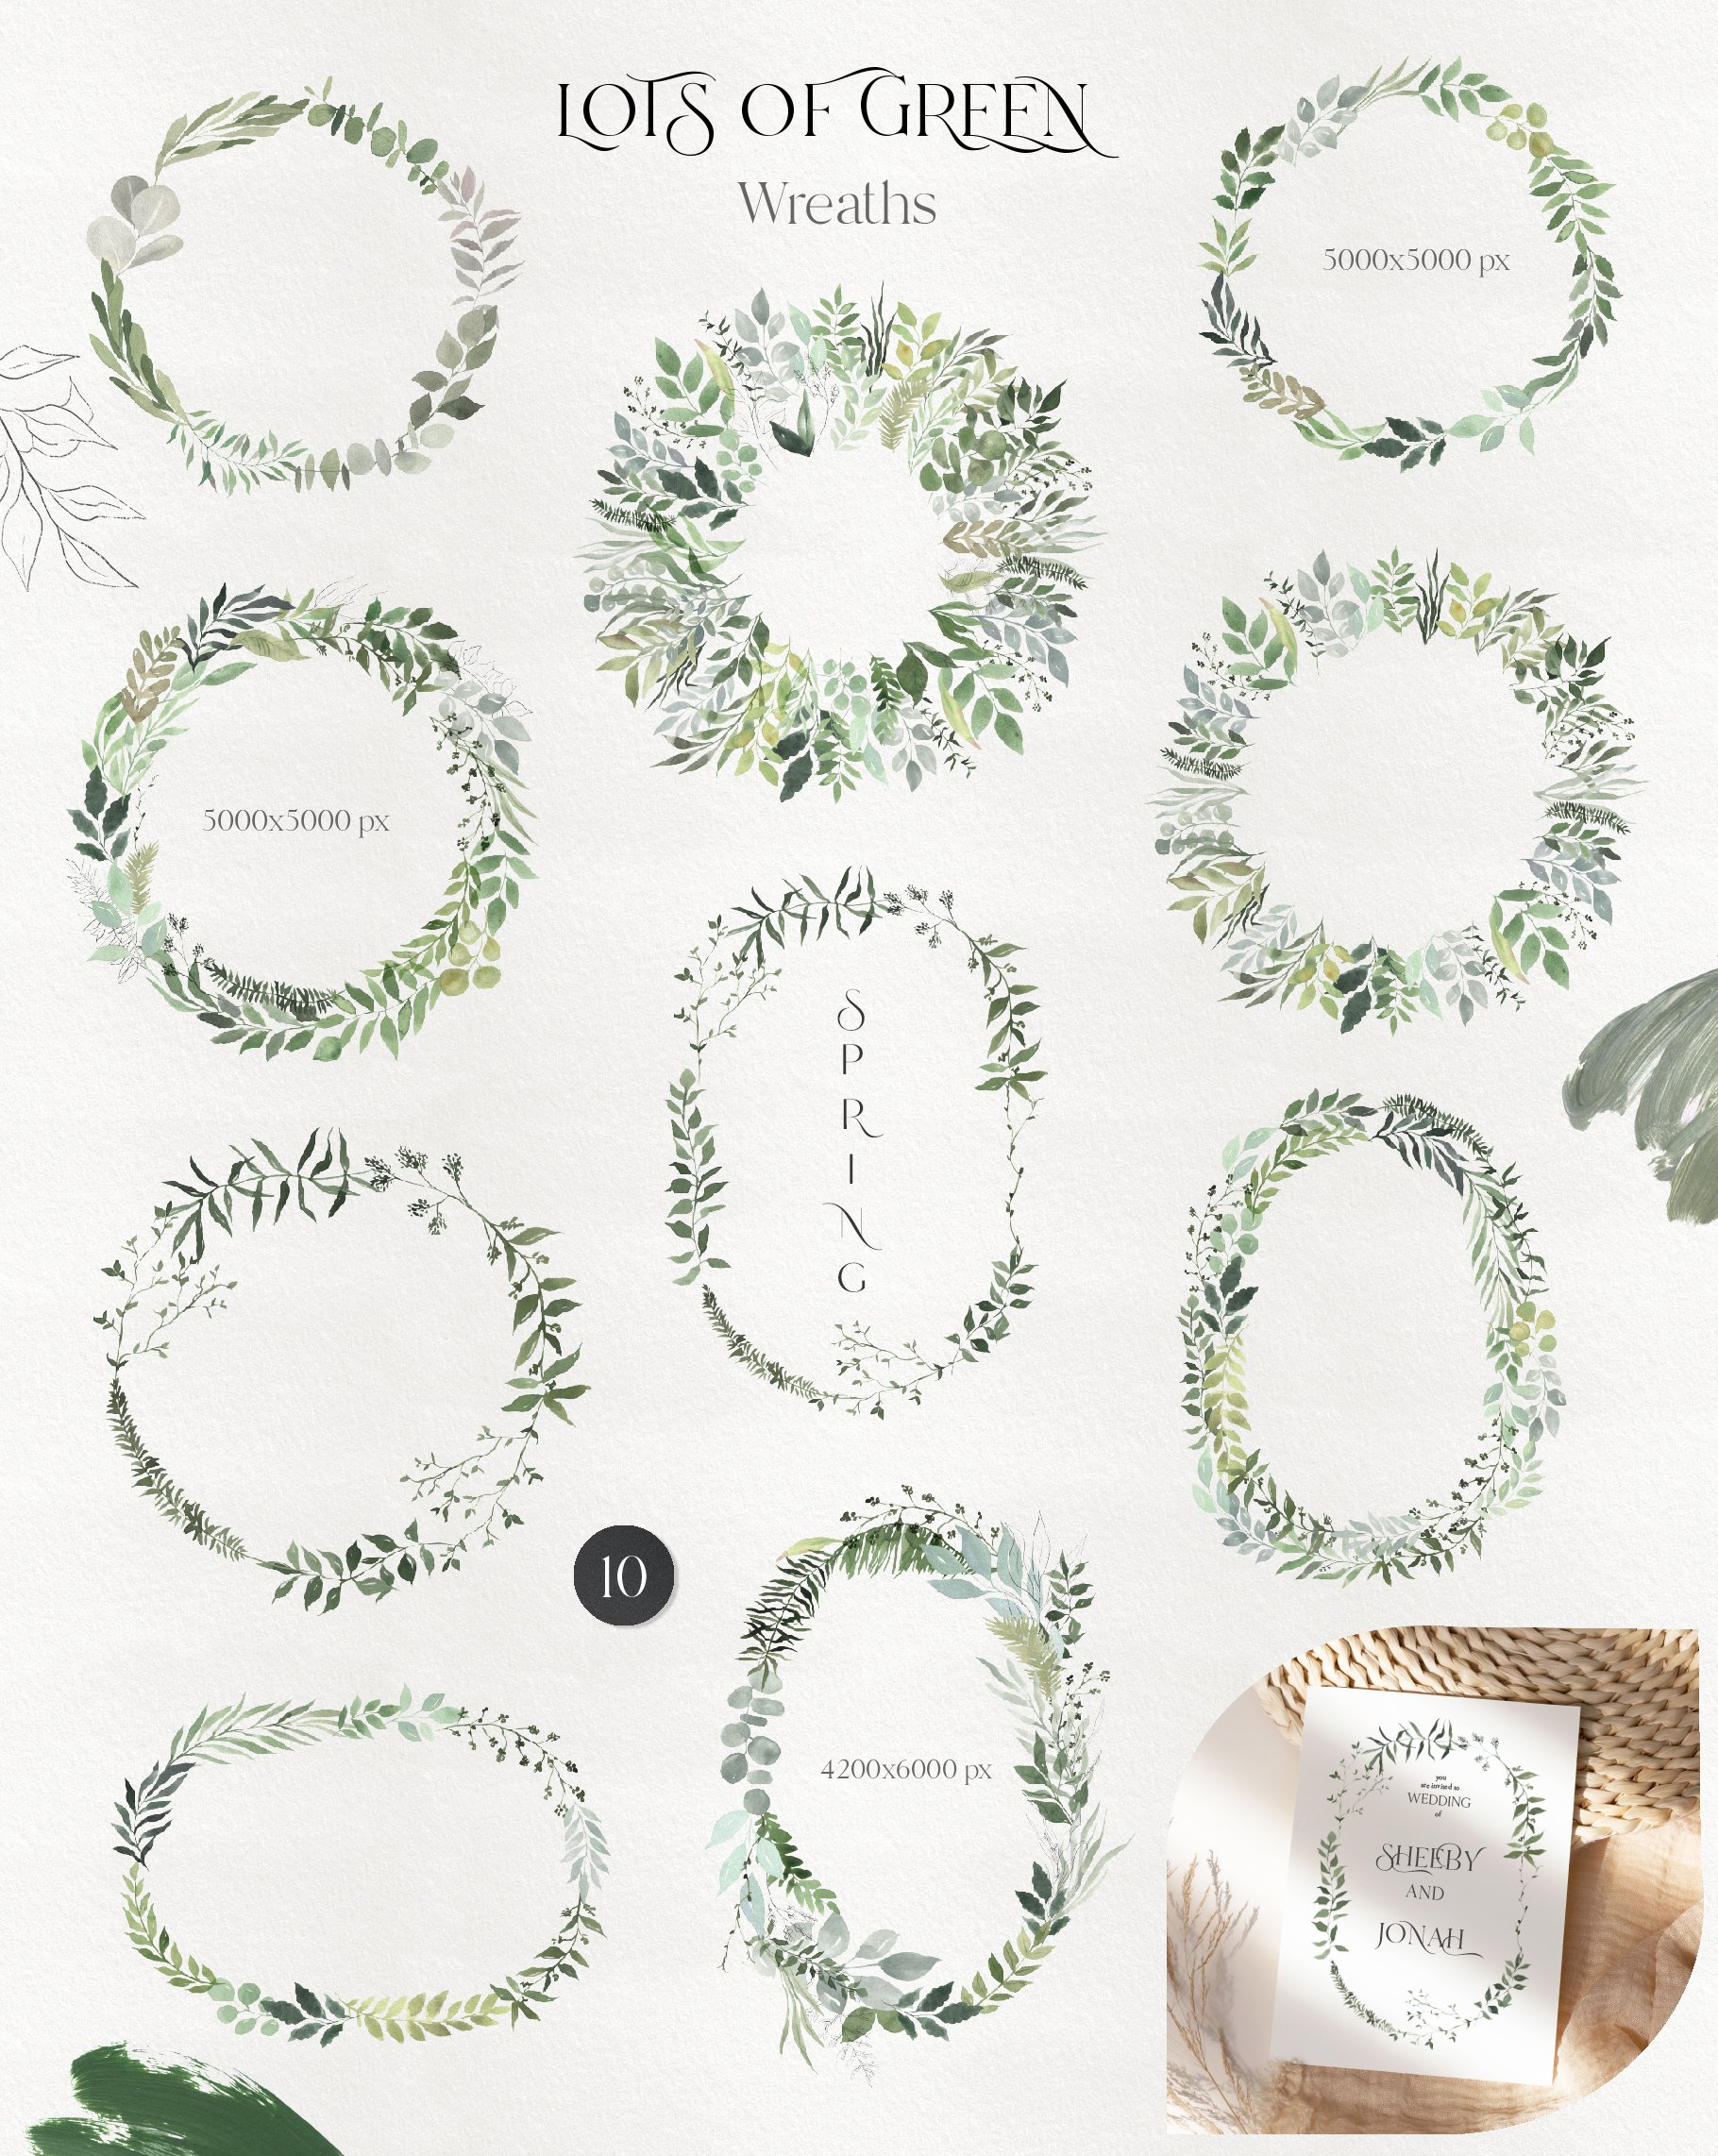 White sheet with a bunch of wreaths on it.